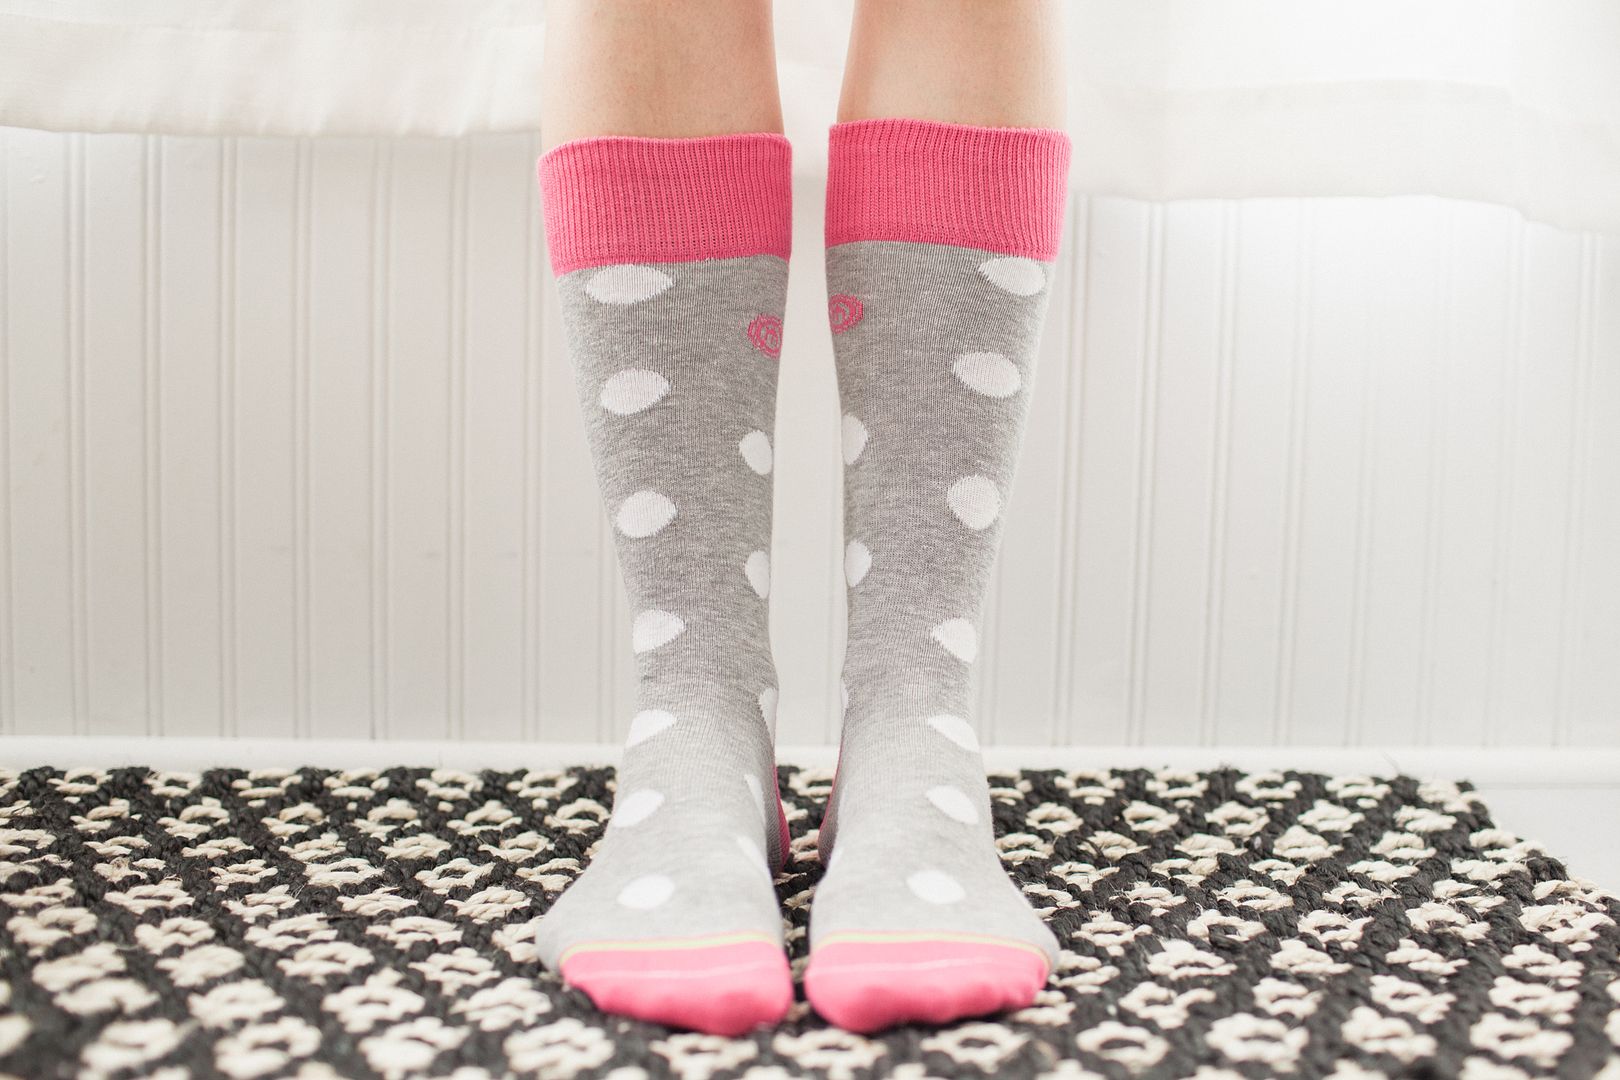 Mitscoots socks for women (and men) are a cool way to give back